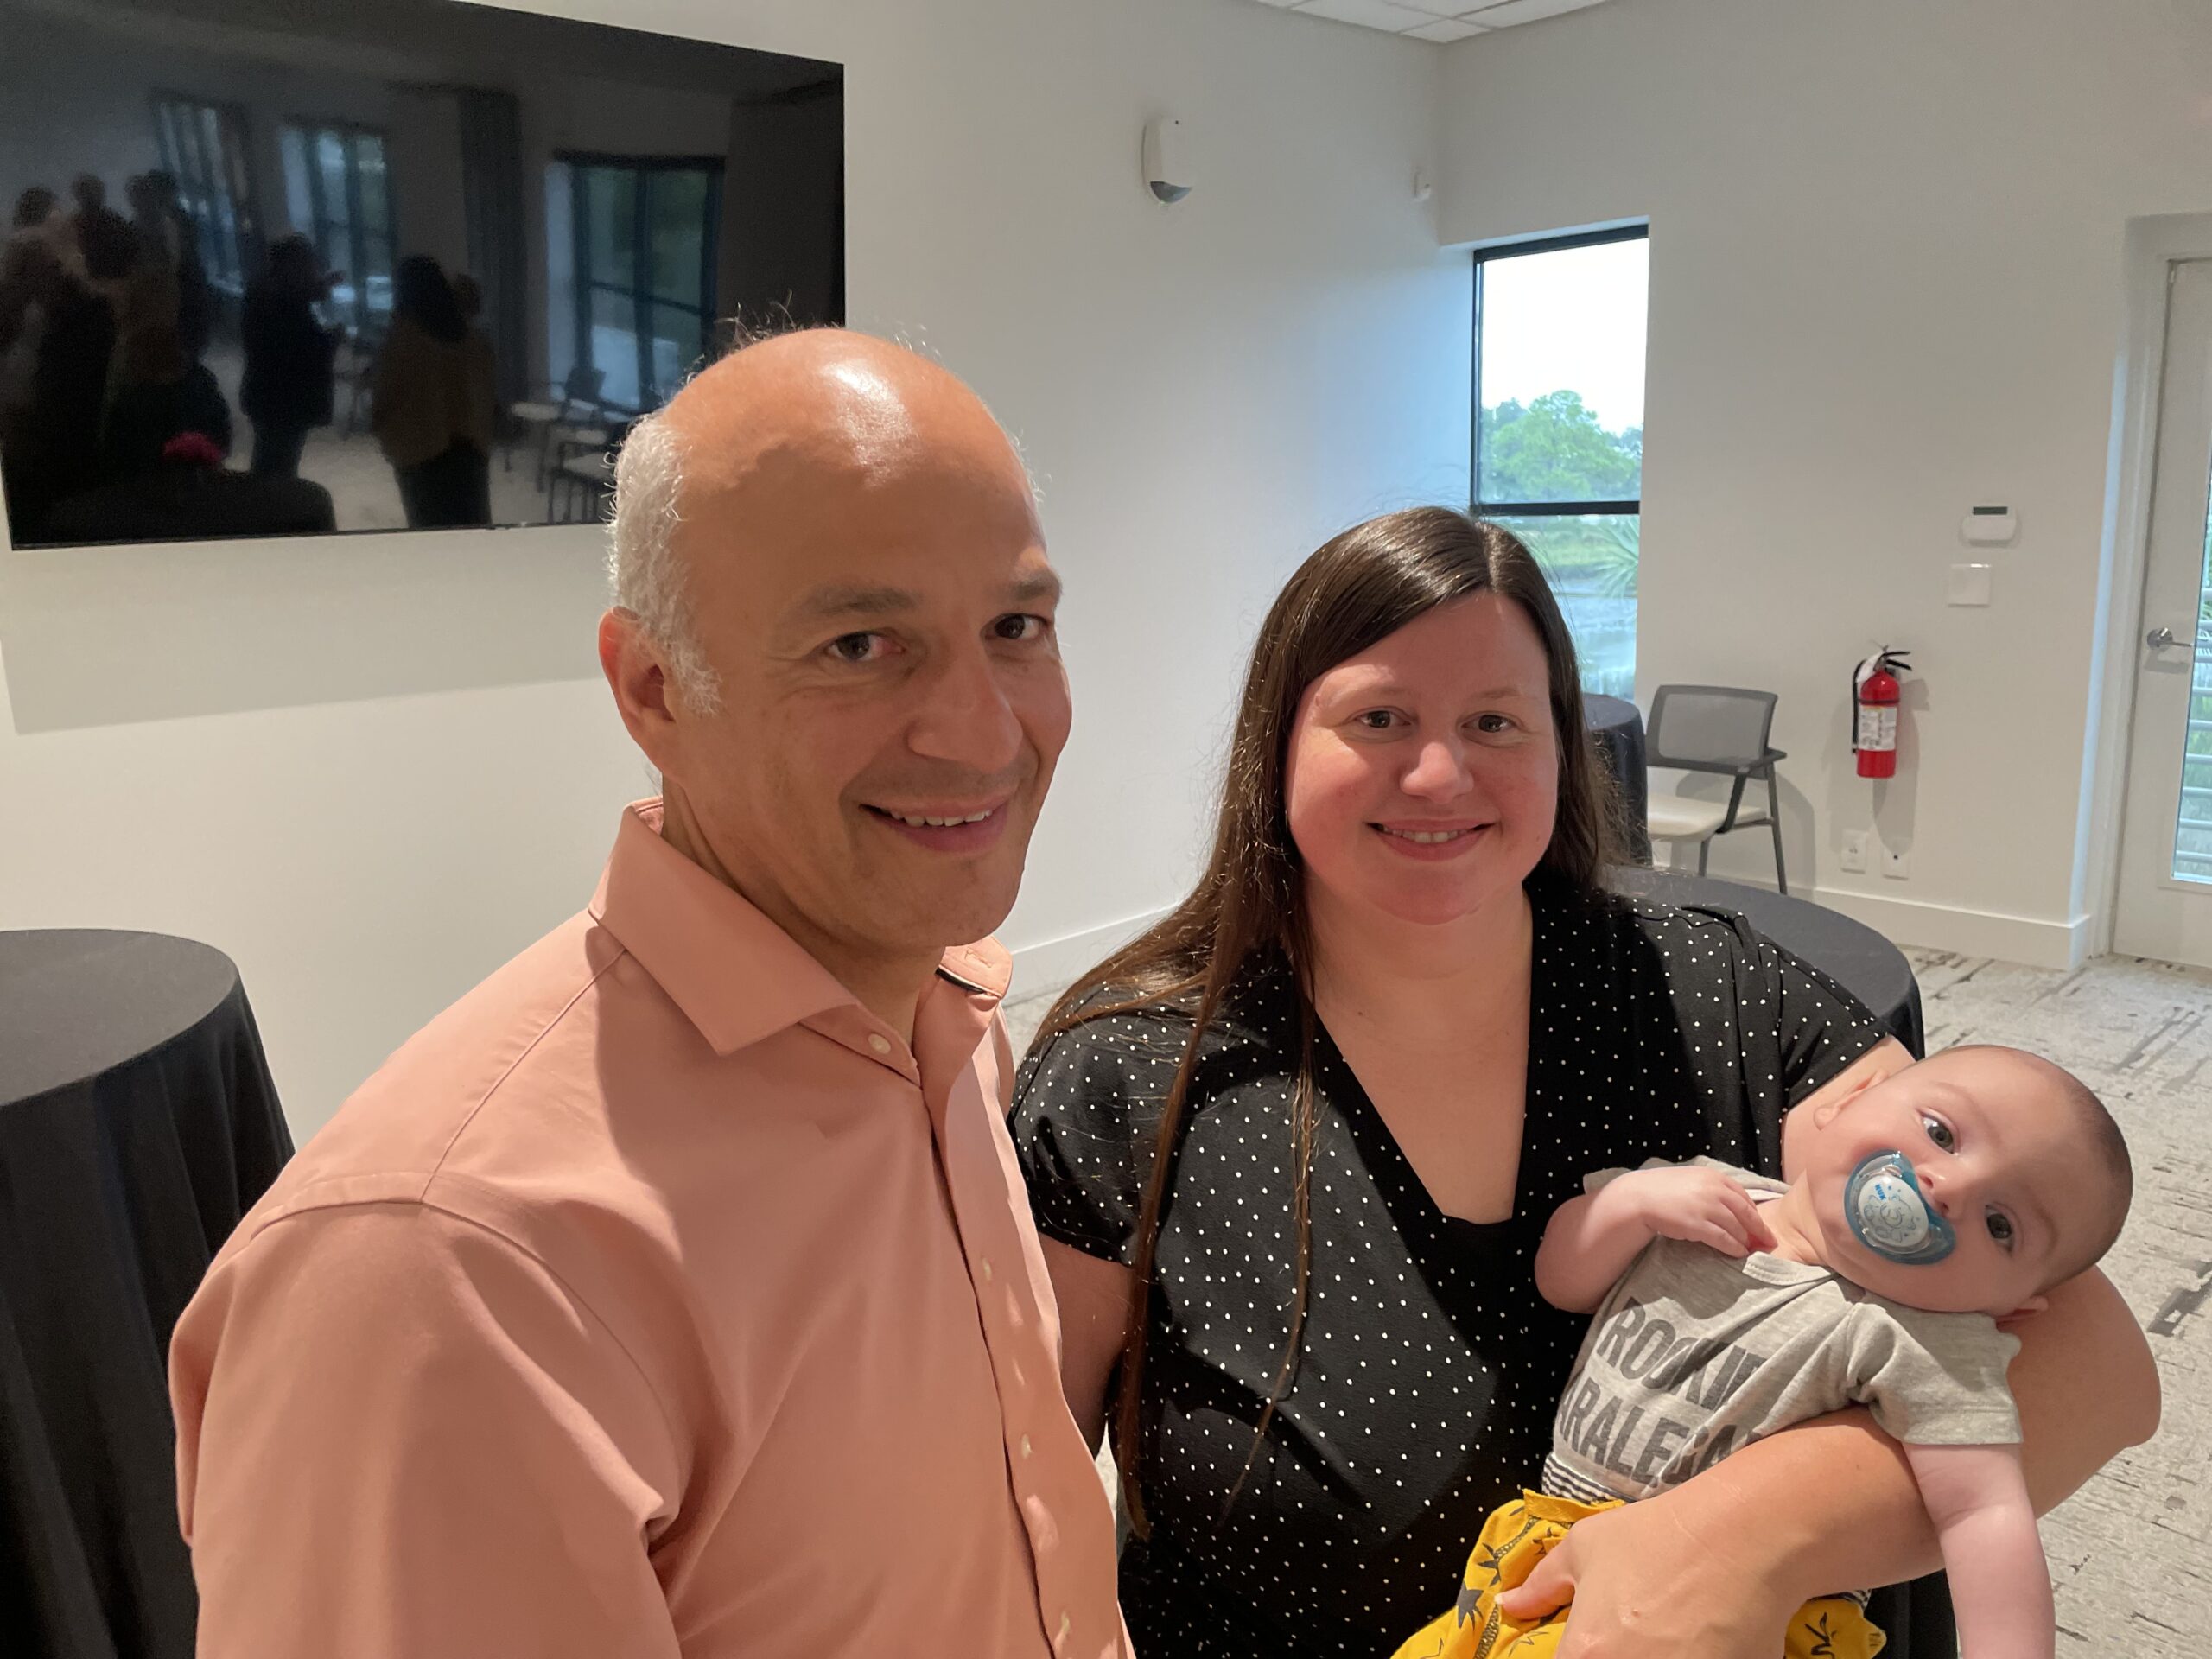 Three people posing for a photo at the Grand Opening inside a room: a bald man in a pink shirt, a woman with long hair in a polka-dot dress holding a baby with a pacifier